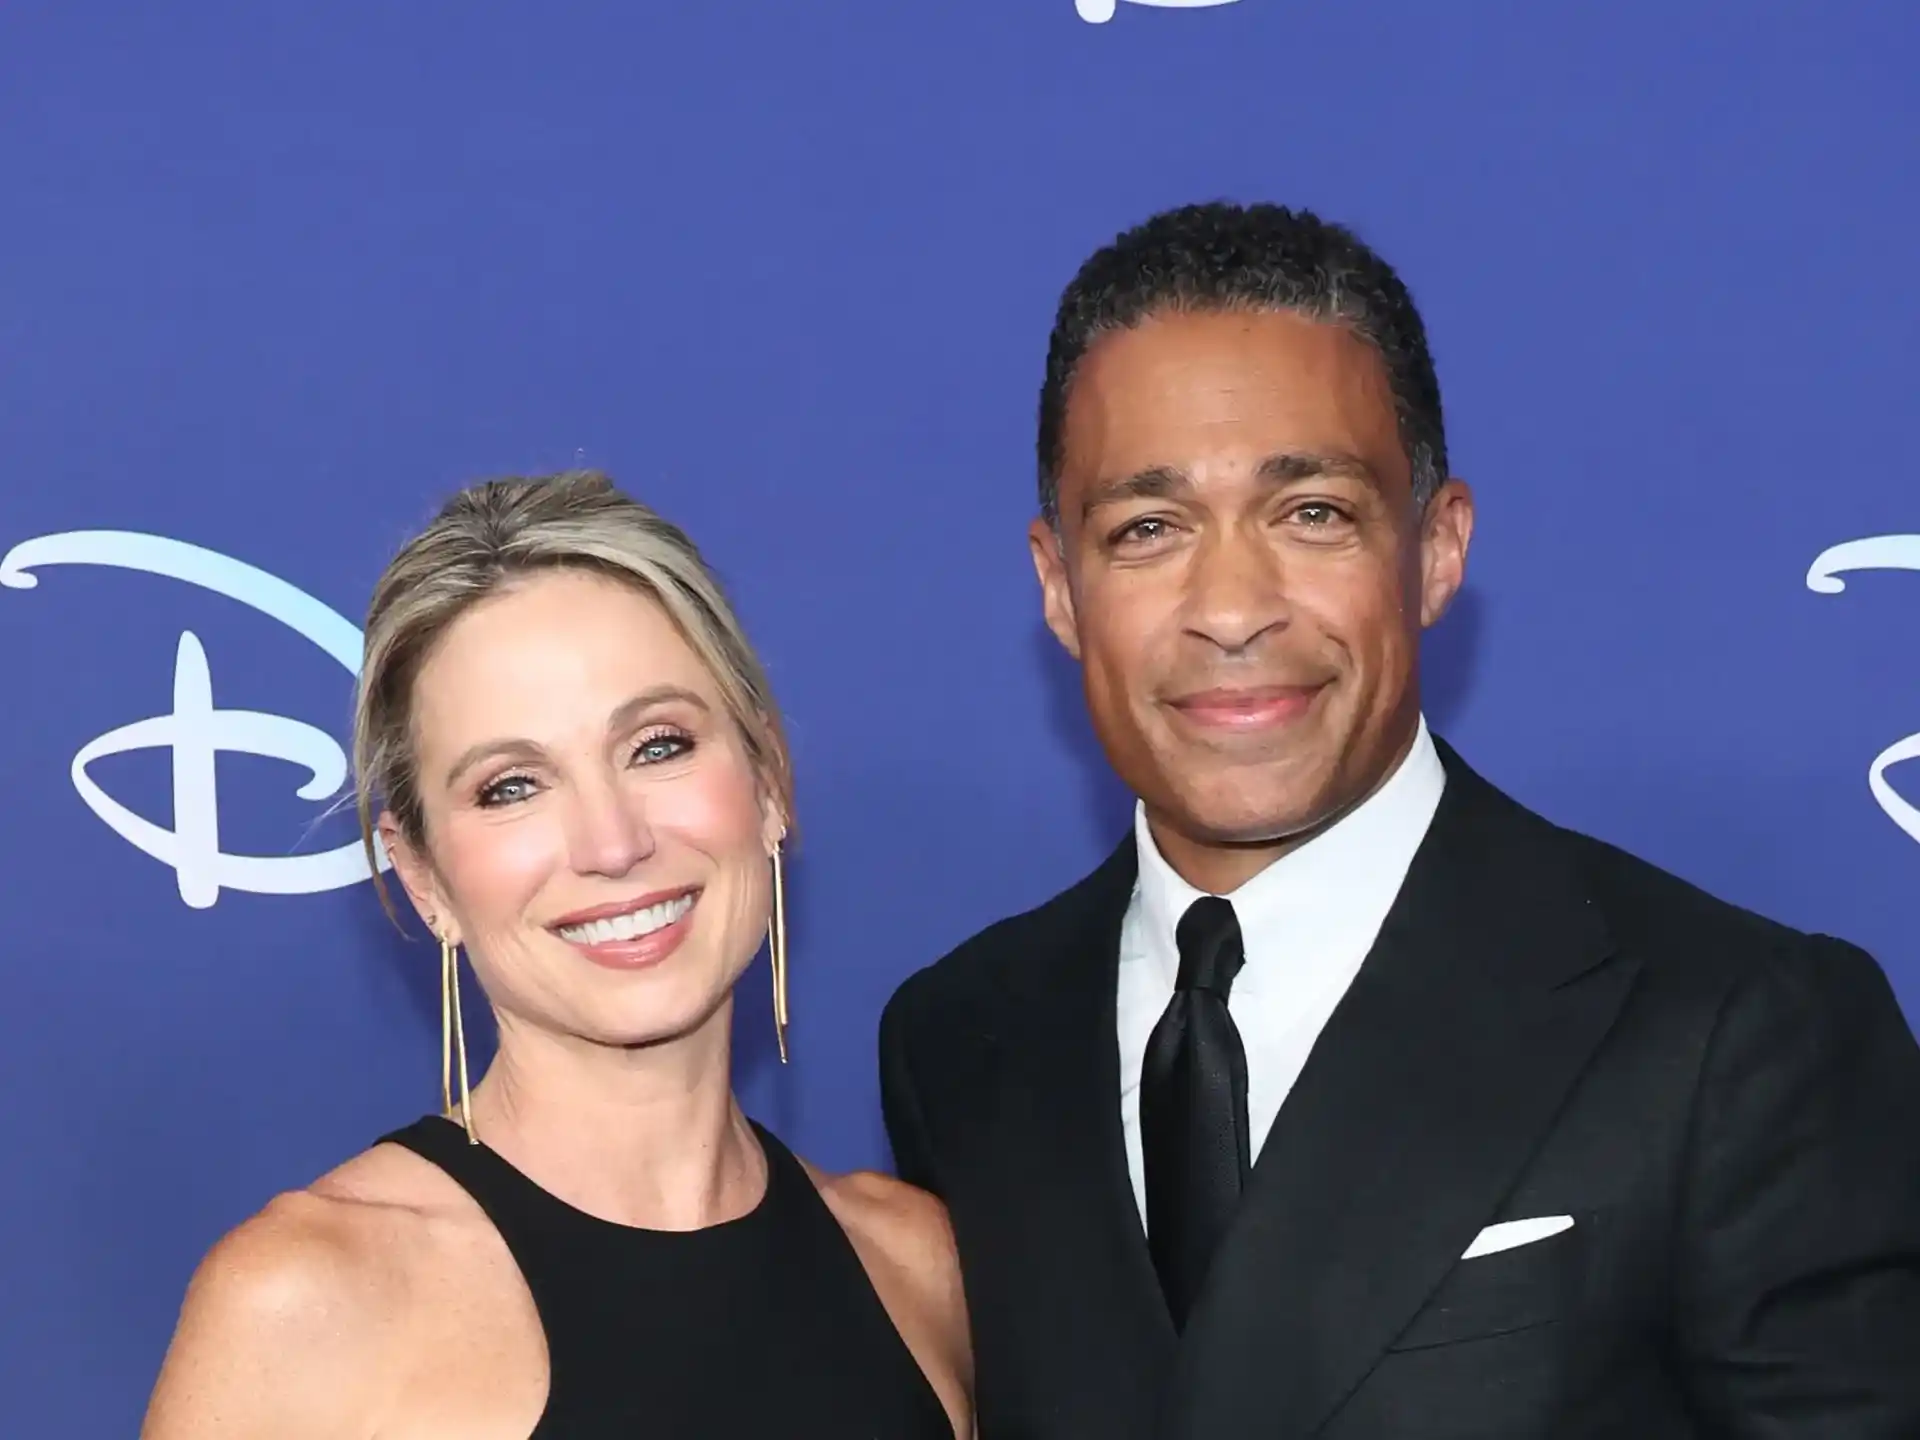 T.J. Holmes teases a new job after being dismissed from 'GMA3' with Amy Robach (1)